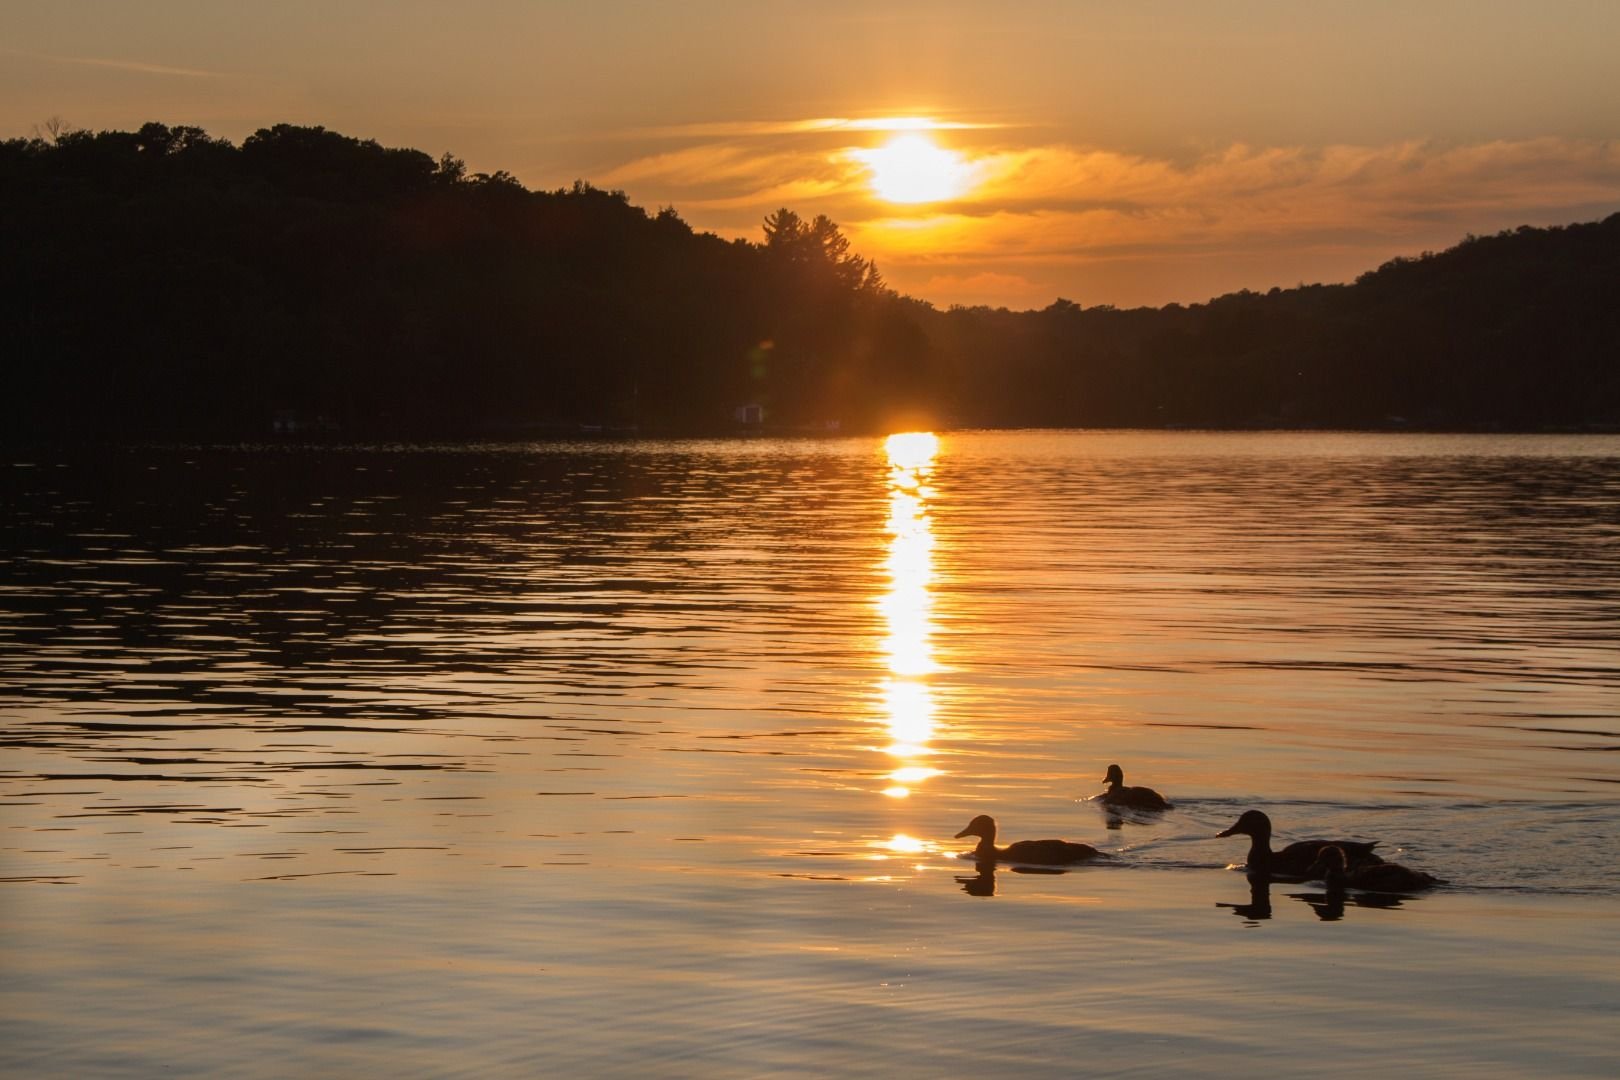 landscape-of-a-northern-lake-at-sunset-with-ducks-56134139.jpg